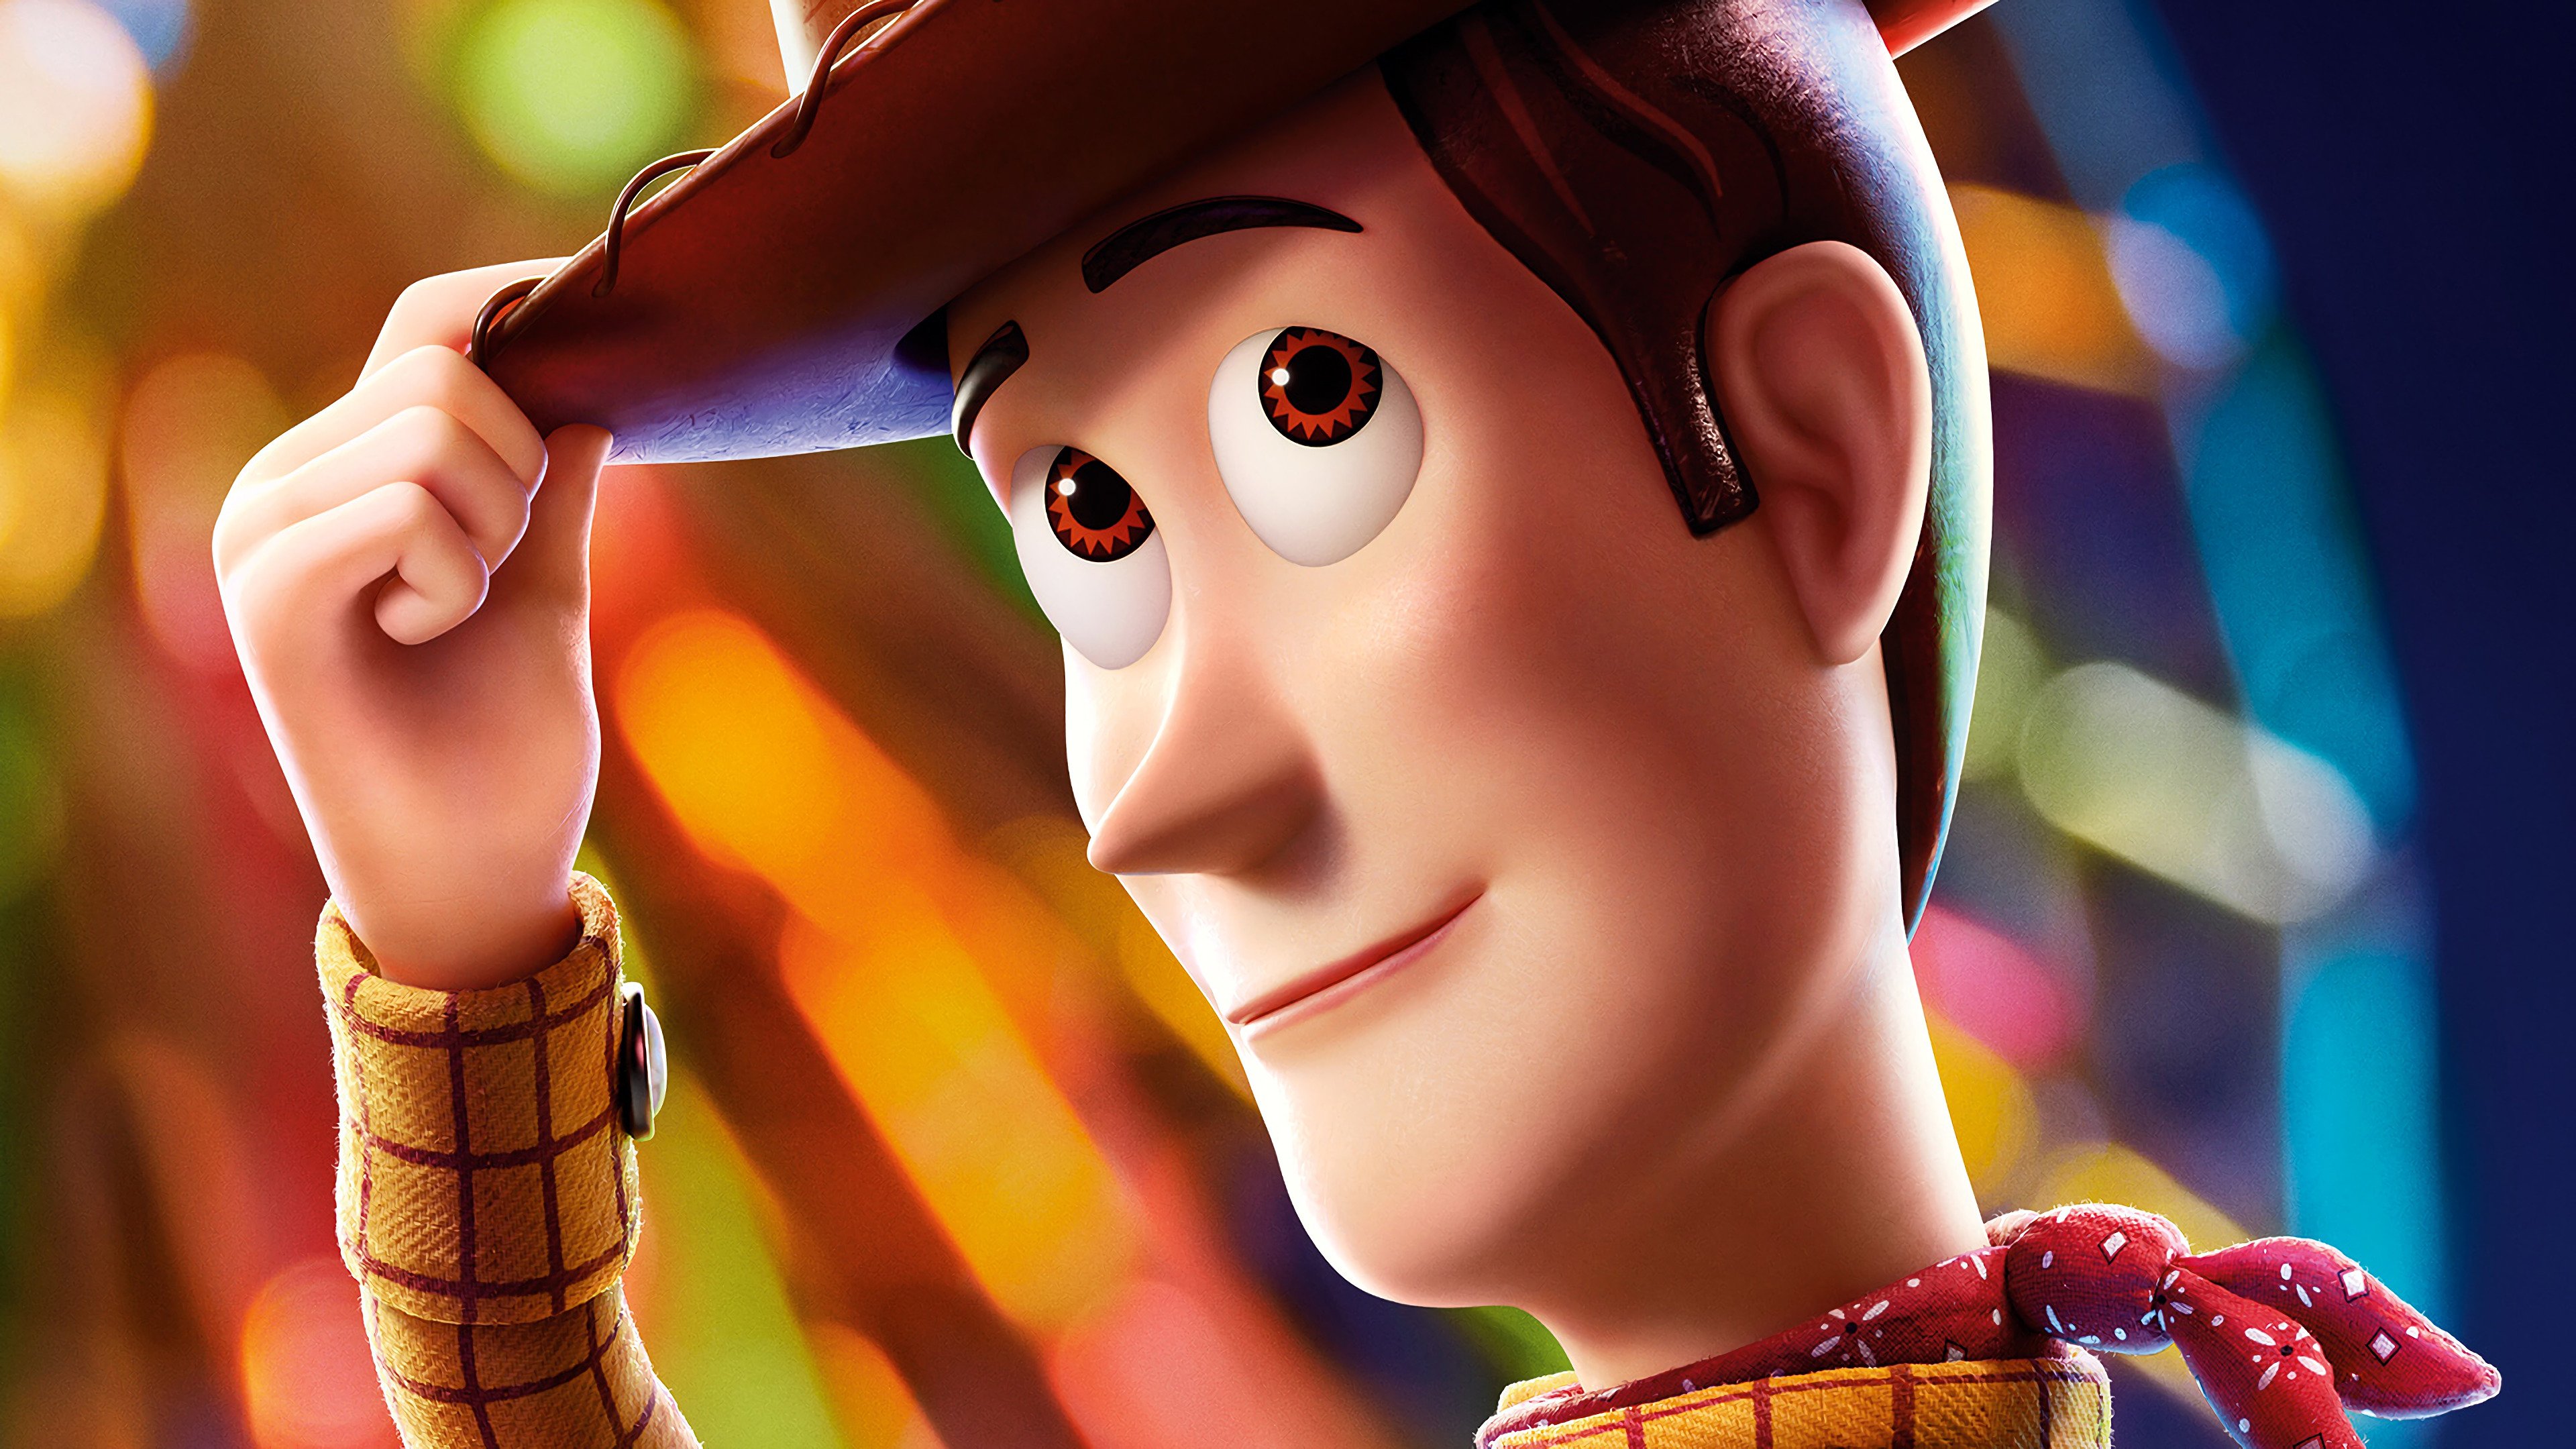 download woody toy story toy